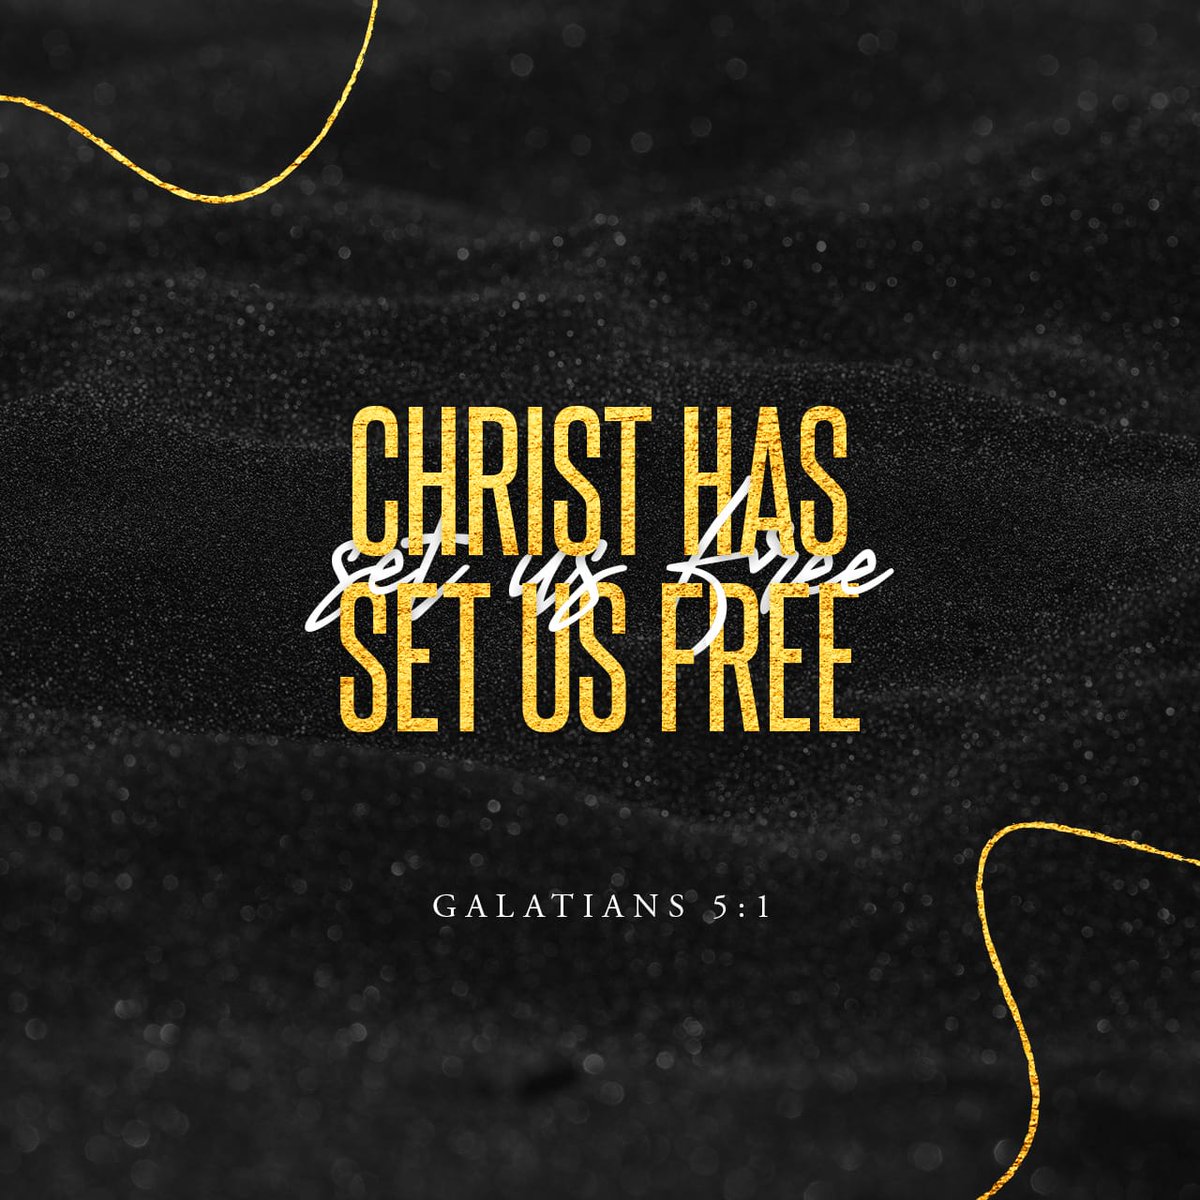 #LivinginFreedom

Stand fast therefore in the liberty wherewith Christ hath made us free, and be not entangled again wi…
bible.com/bible/1/gal.5.…